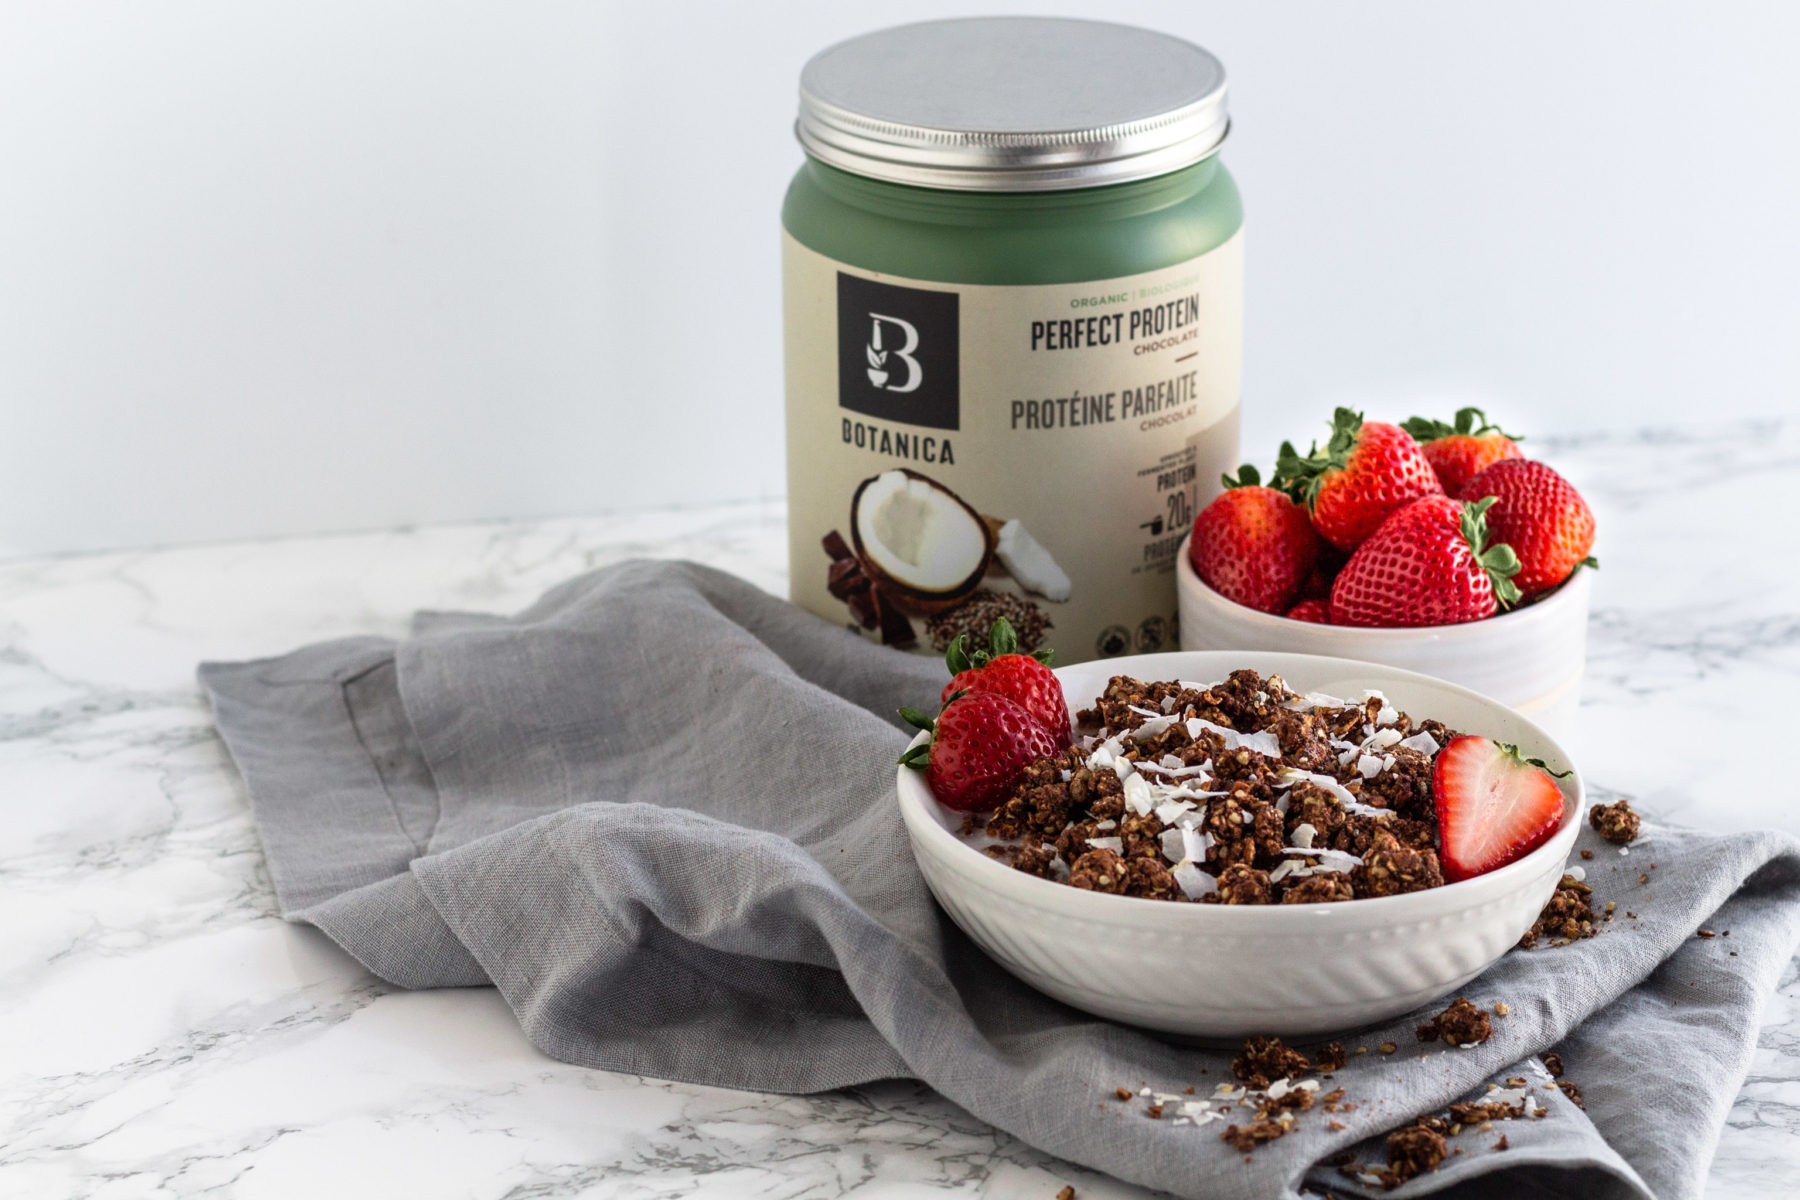 Protein packed chocolate granola recipe using Botanica health perfect protein chocolate protein powder. vegan and gluten free made with real food ingredients.